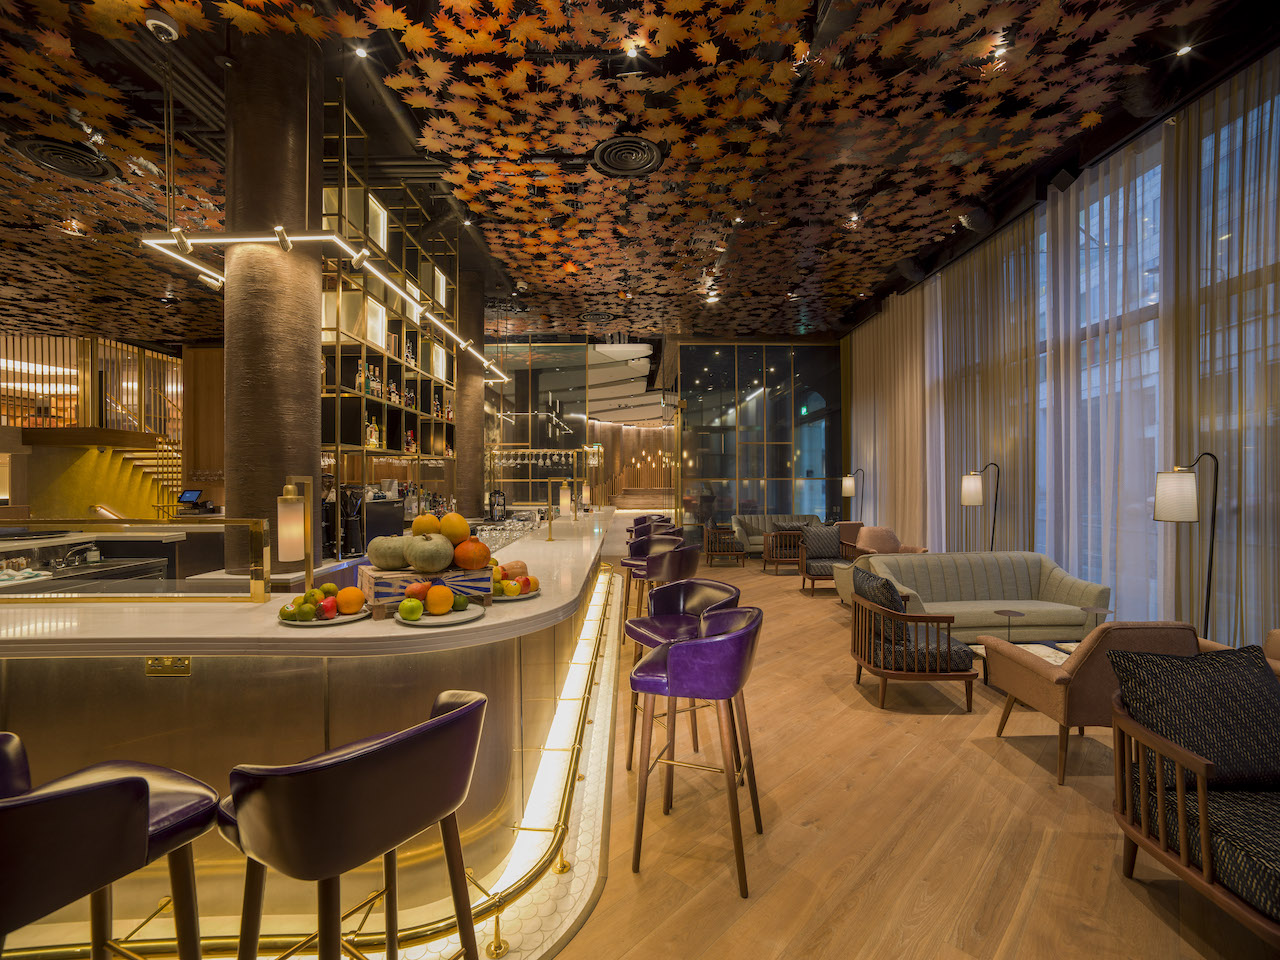 Sycamore - the new day Italian urban hangout within the luxury Middle Eight Hotel in Covent Garden